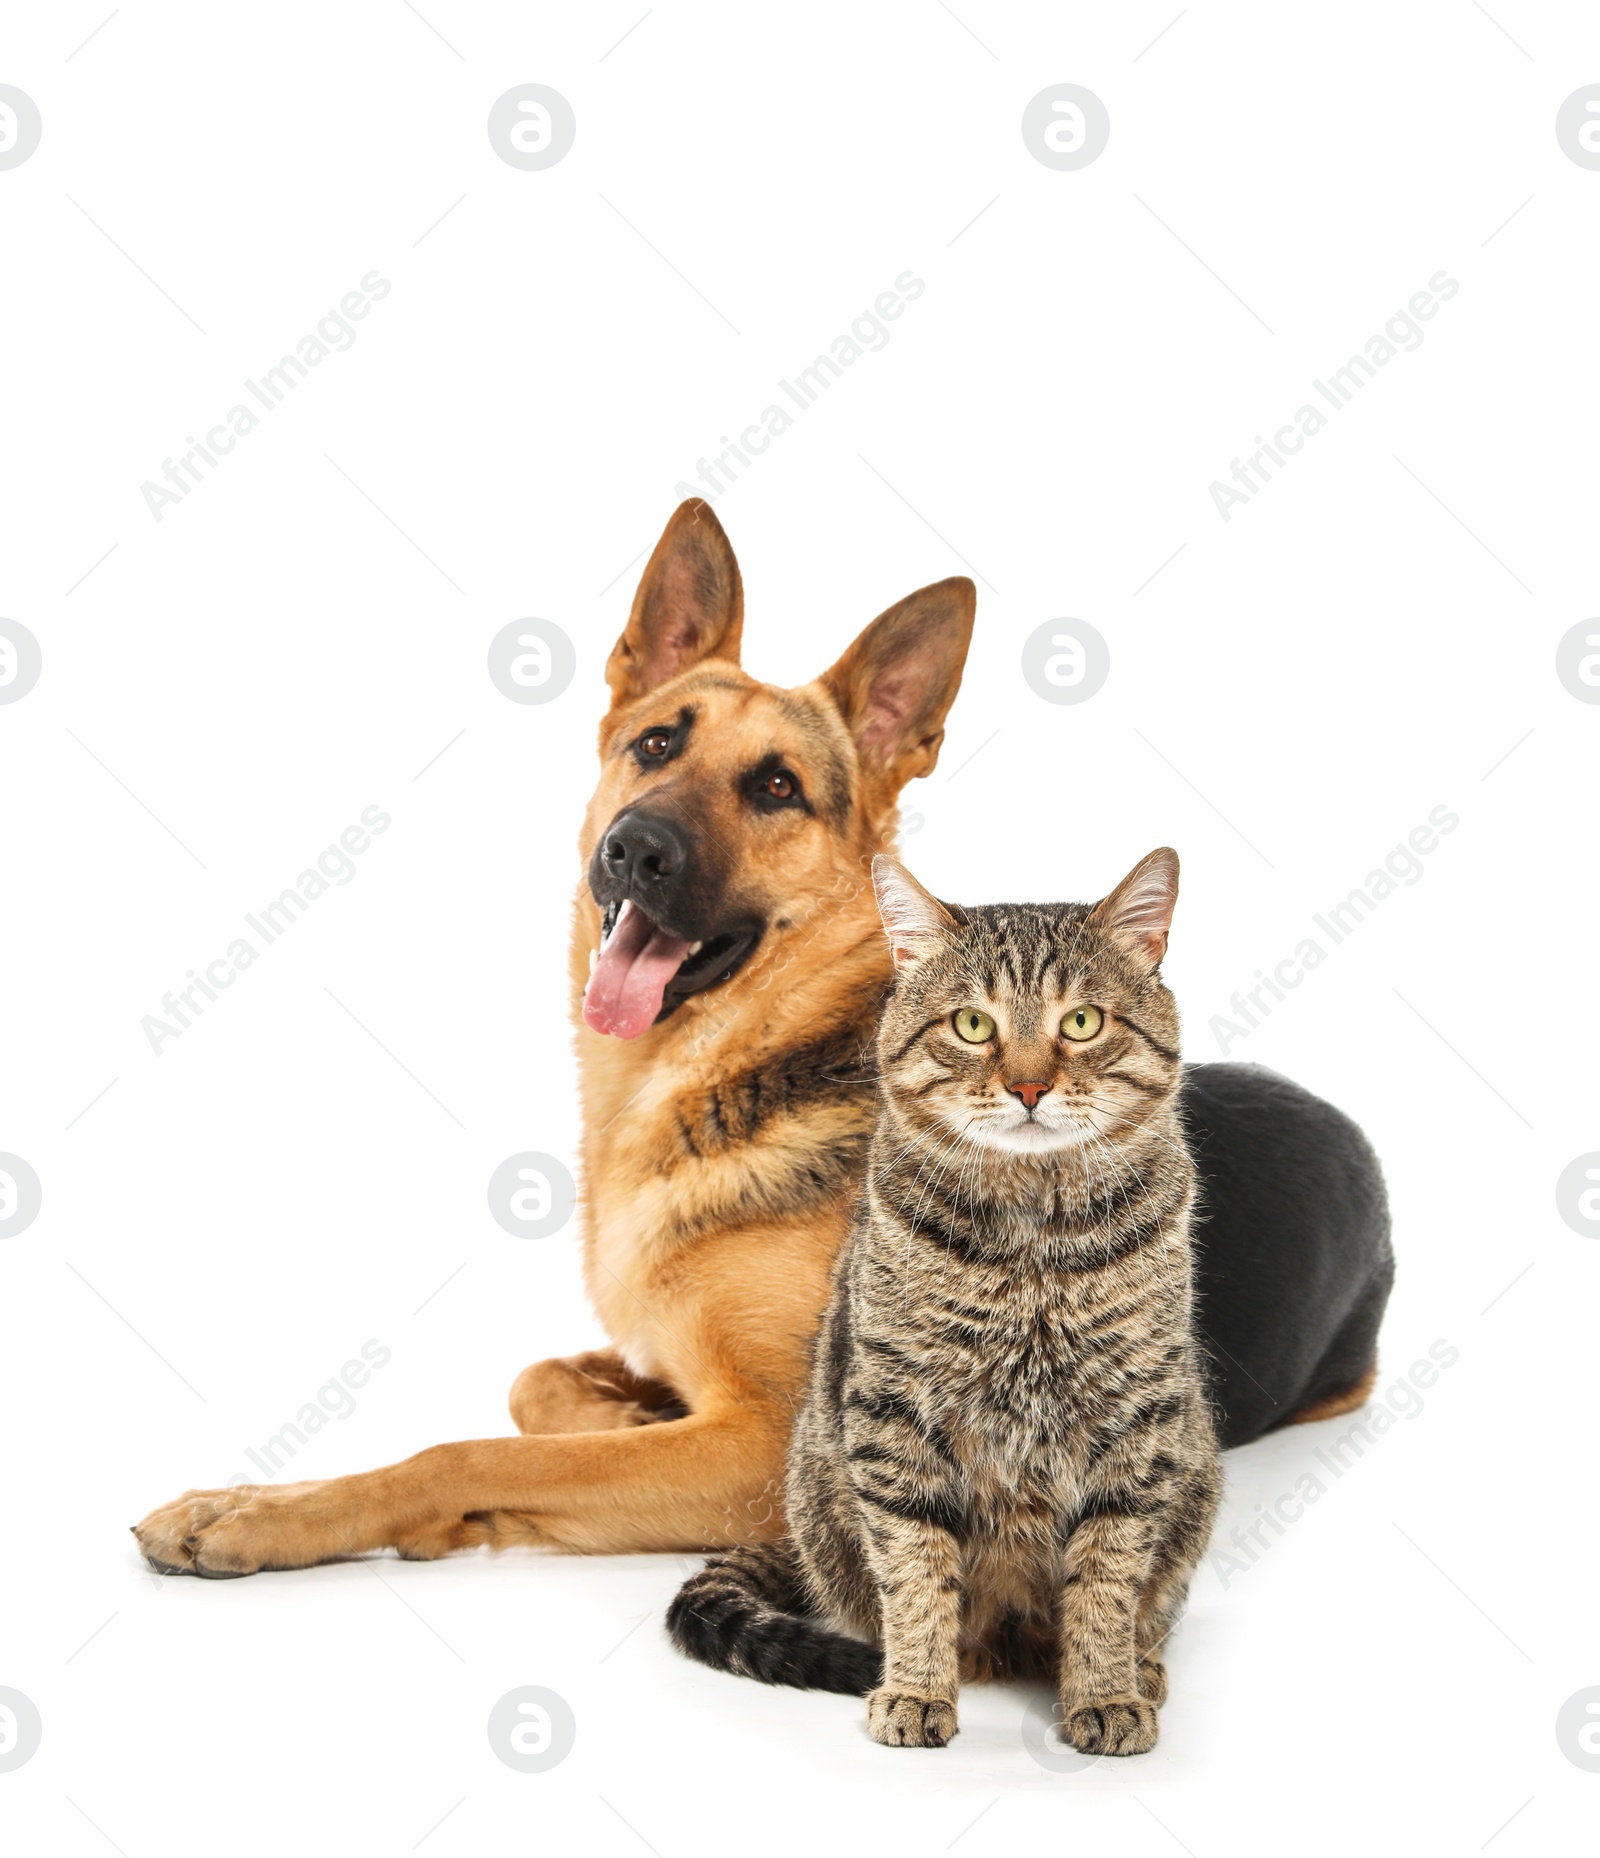 Photo of Adorable cat and dog on white background. Animal friendship